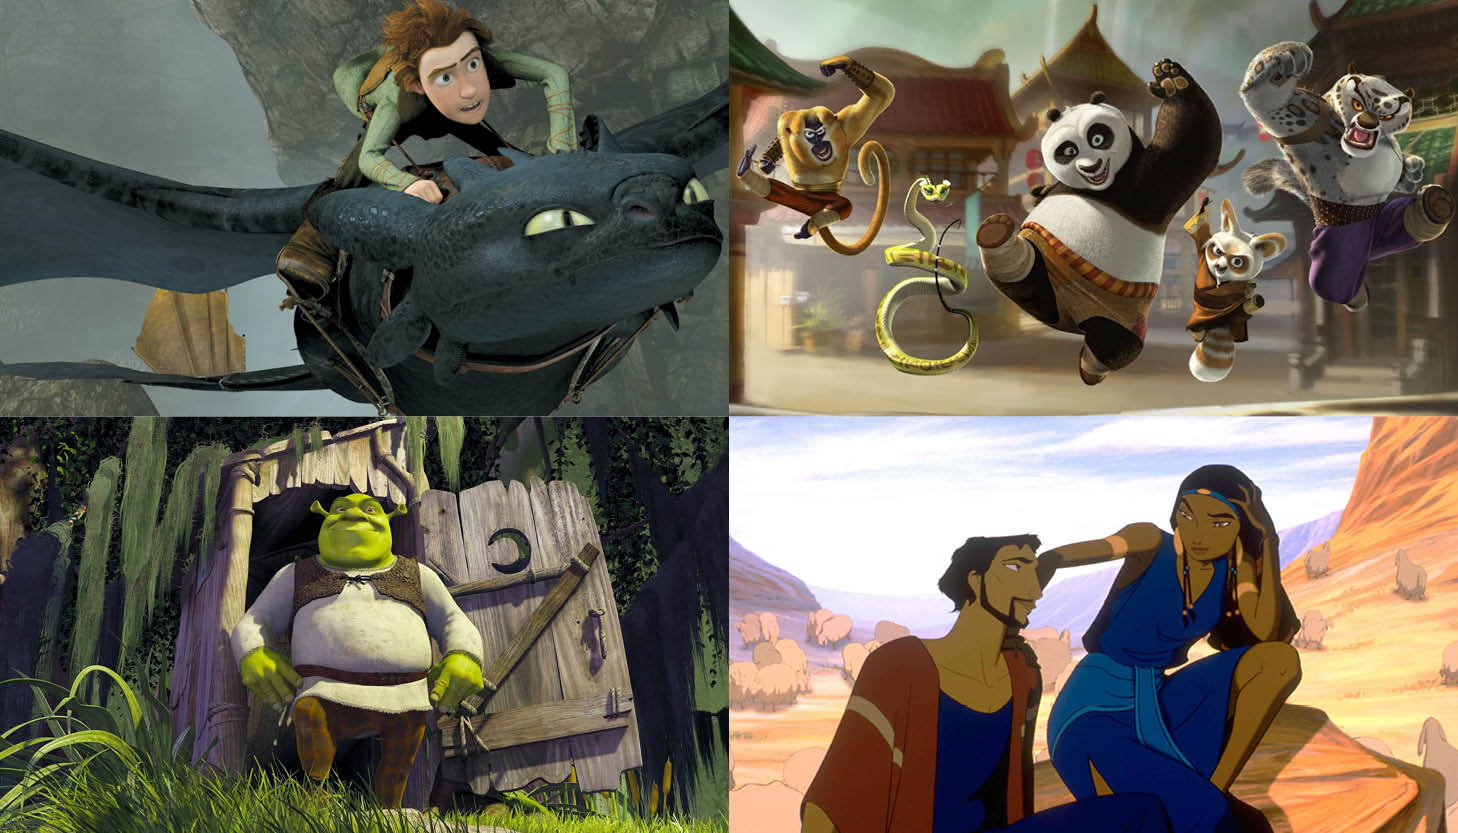 A collage of four stills from the films How to Train Your Dragon, Kung Fu Panda, Shrek, and The Prince of Egypt.